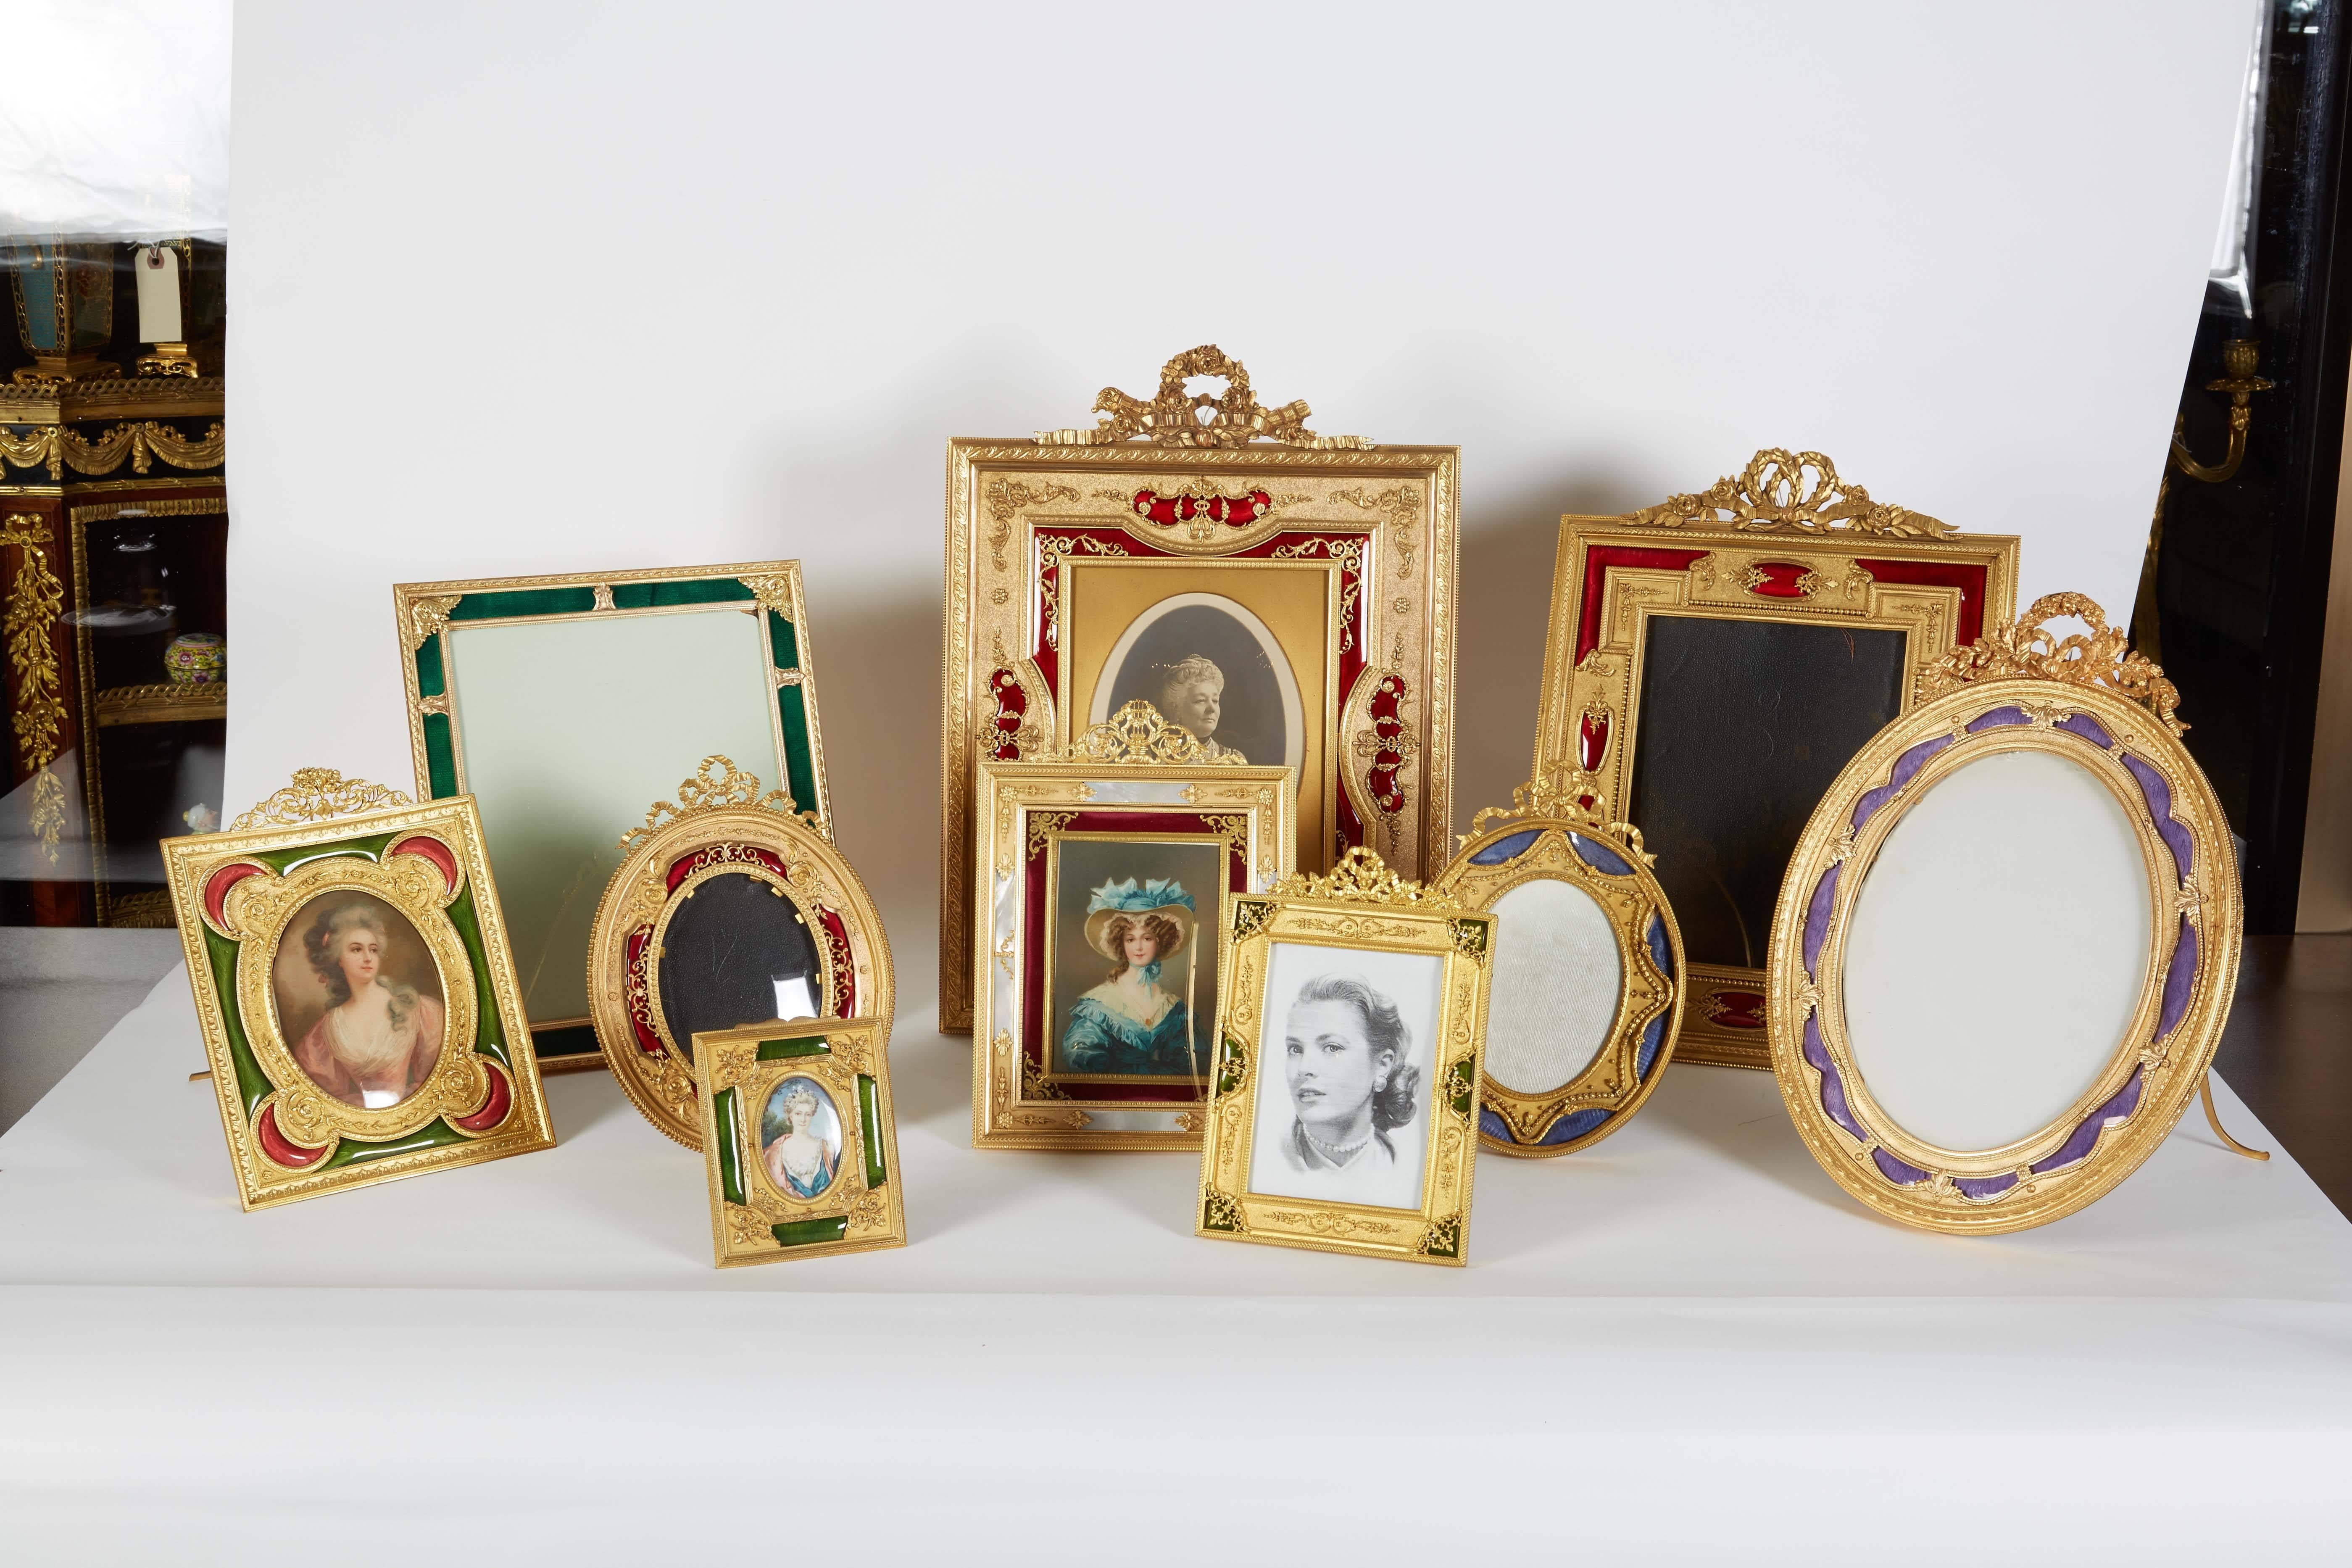 A French gilt bronze ormolu and green guilloche enamel picture photo frame, 19th century.

Frame size: 12.5 x 10.5 inches.
Photo size: 9.5 x 7 inches.